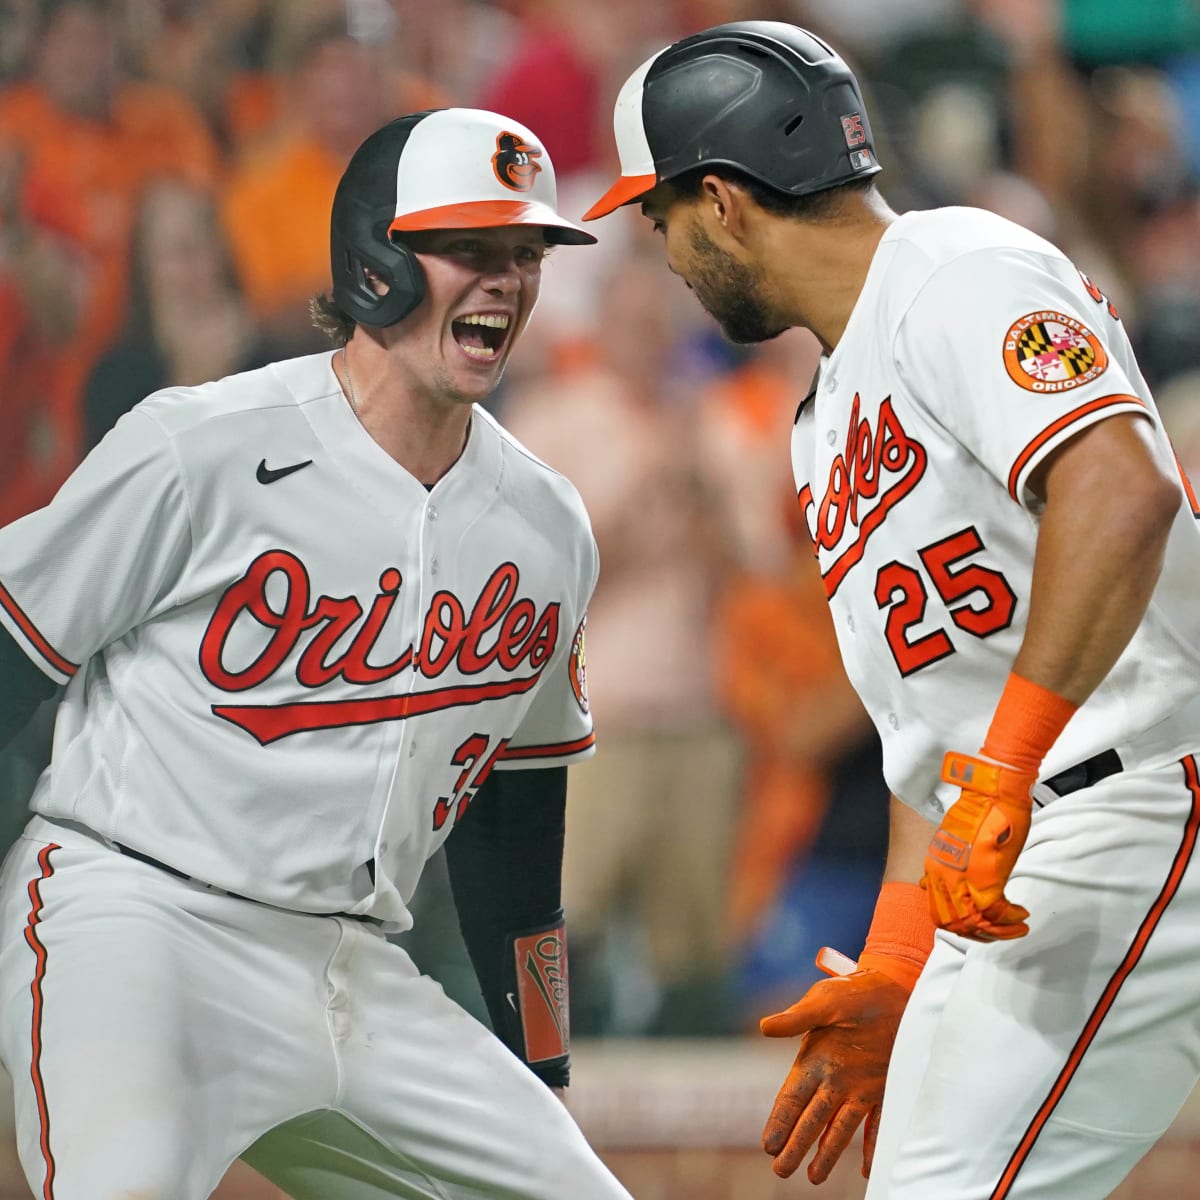 Rockies at Orioles Free Live Stream MLB Online, Channel - How to Watch and Stream Major League and College Sports